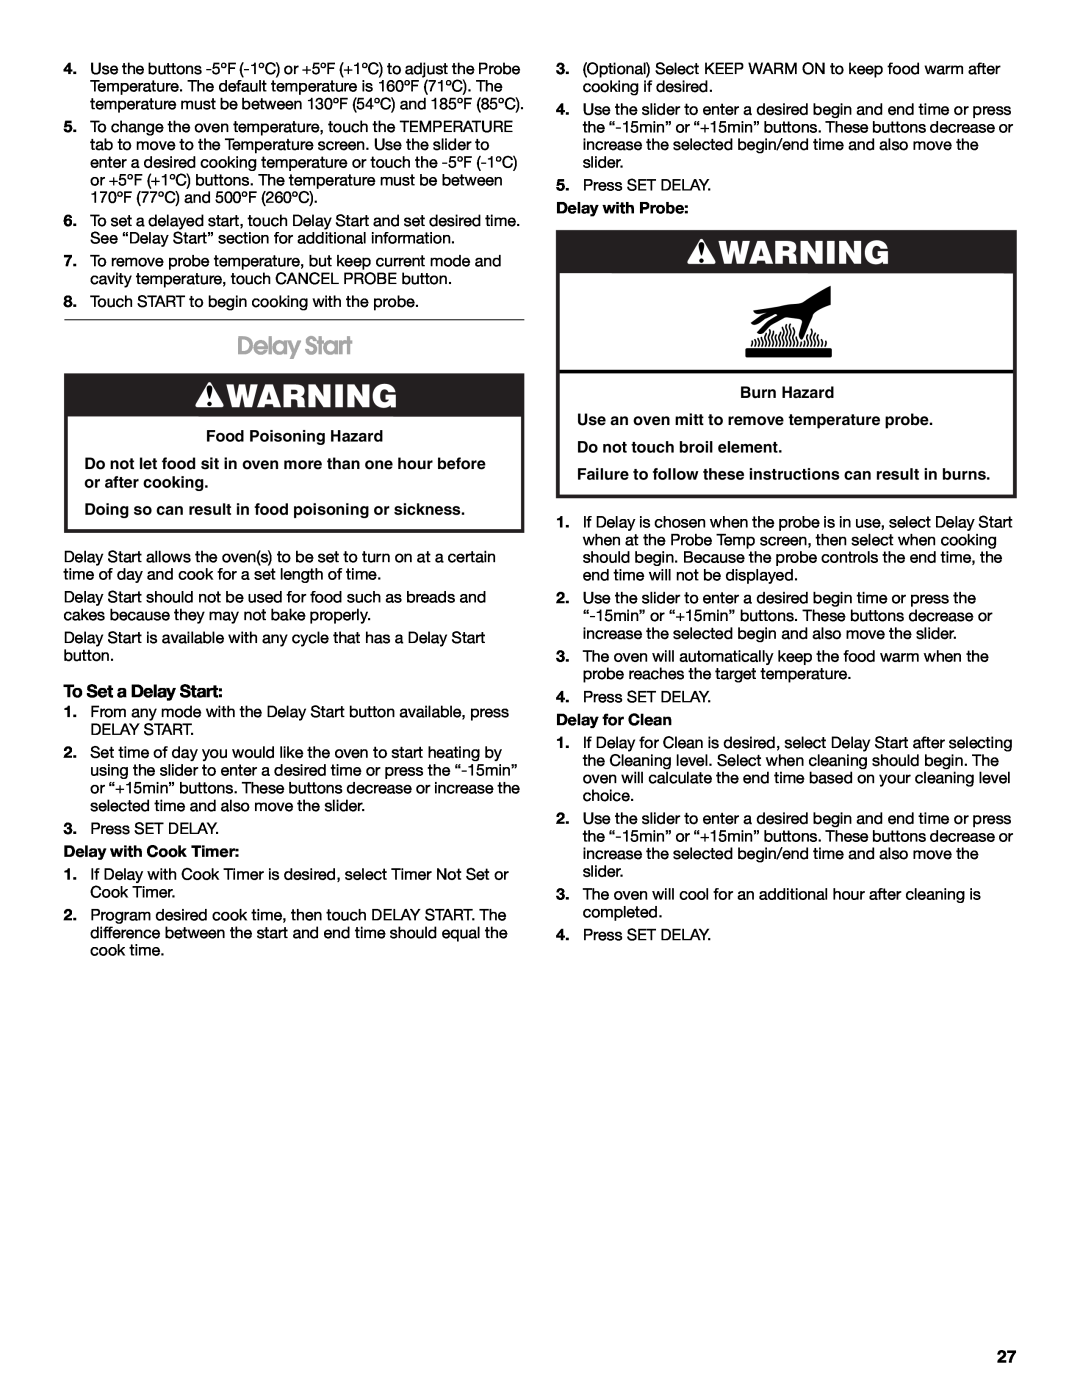 Jenn-Air JDRP548 manual To Set a Delay Start, Food Poisoning Hazard, Doing so can result in food poisoning or sickness 